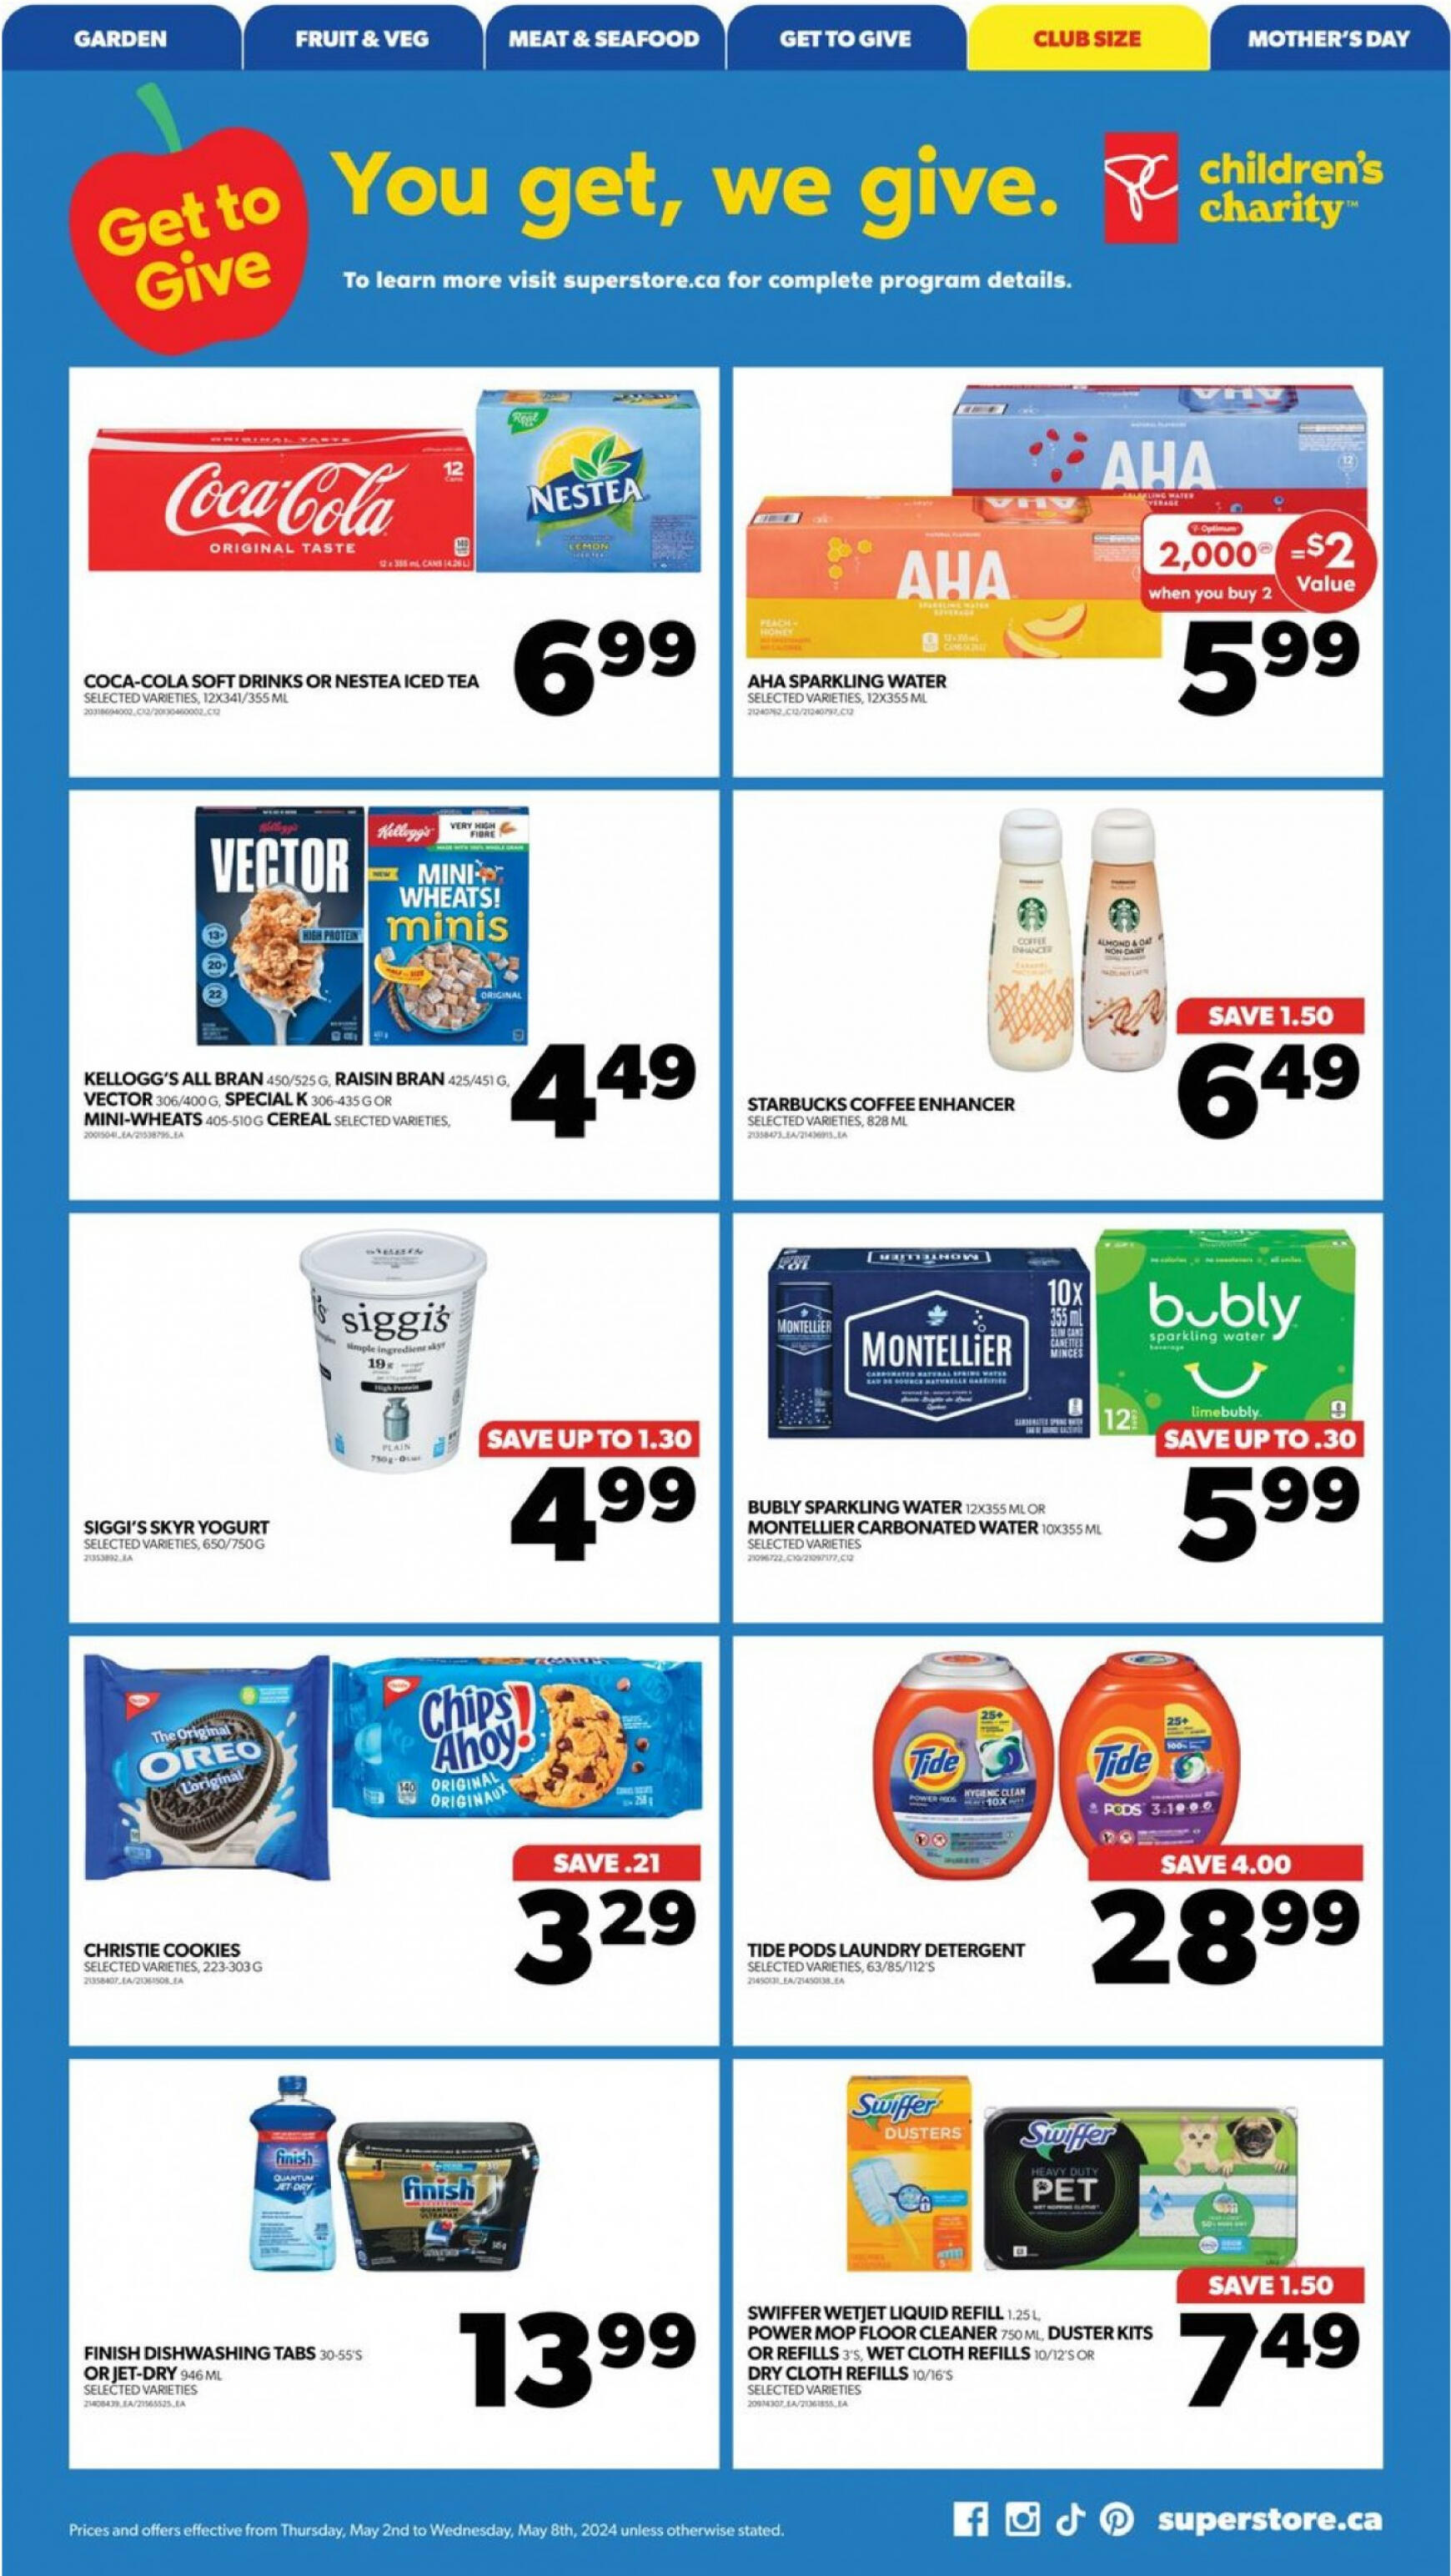 real-canadian-superstore - Real Canadian Superstore flyer current 02.05. - 08.05. - page: 13